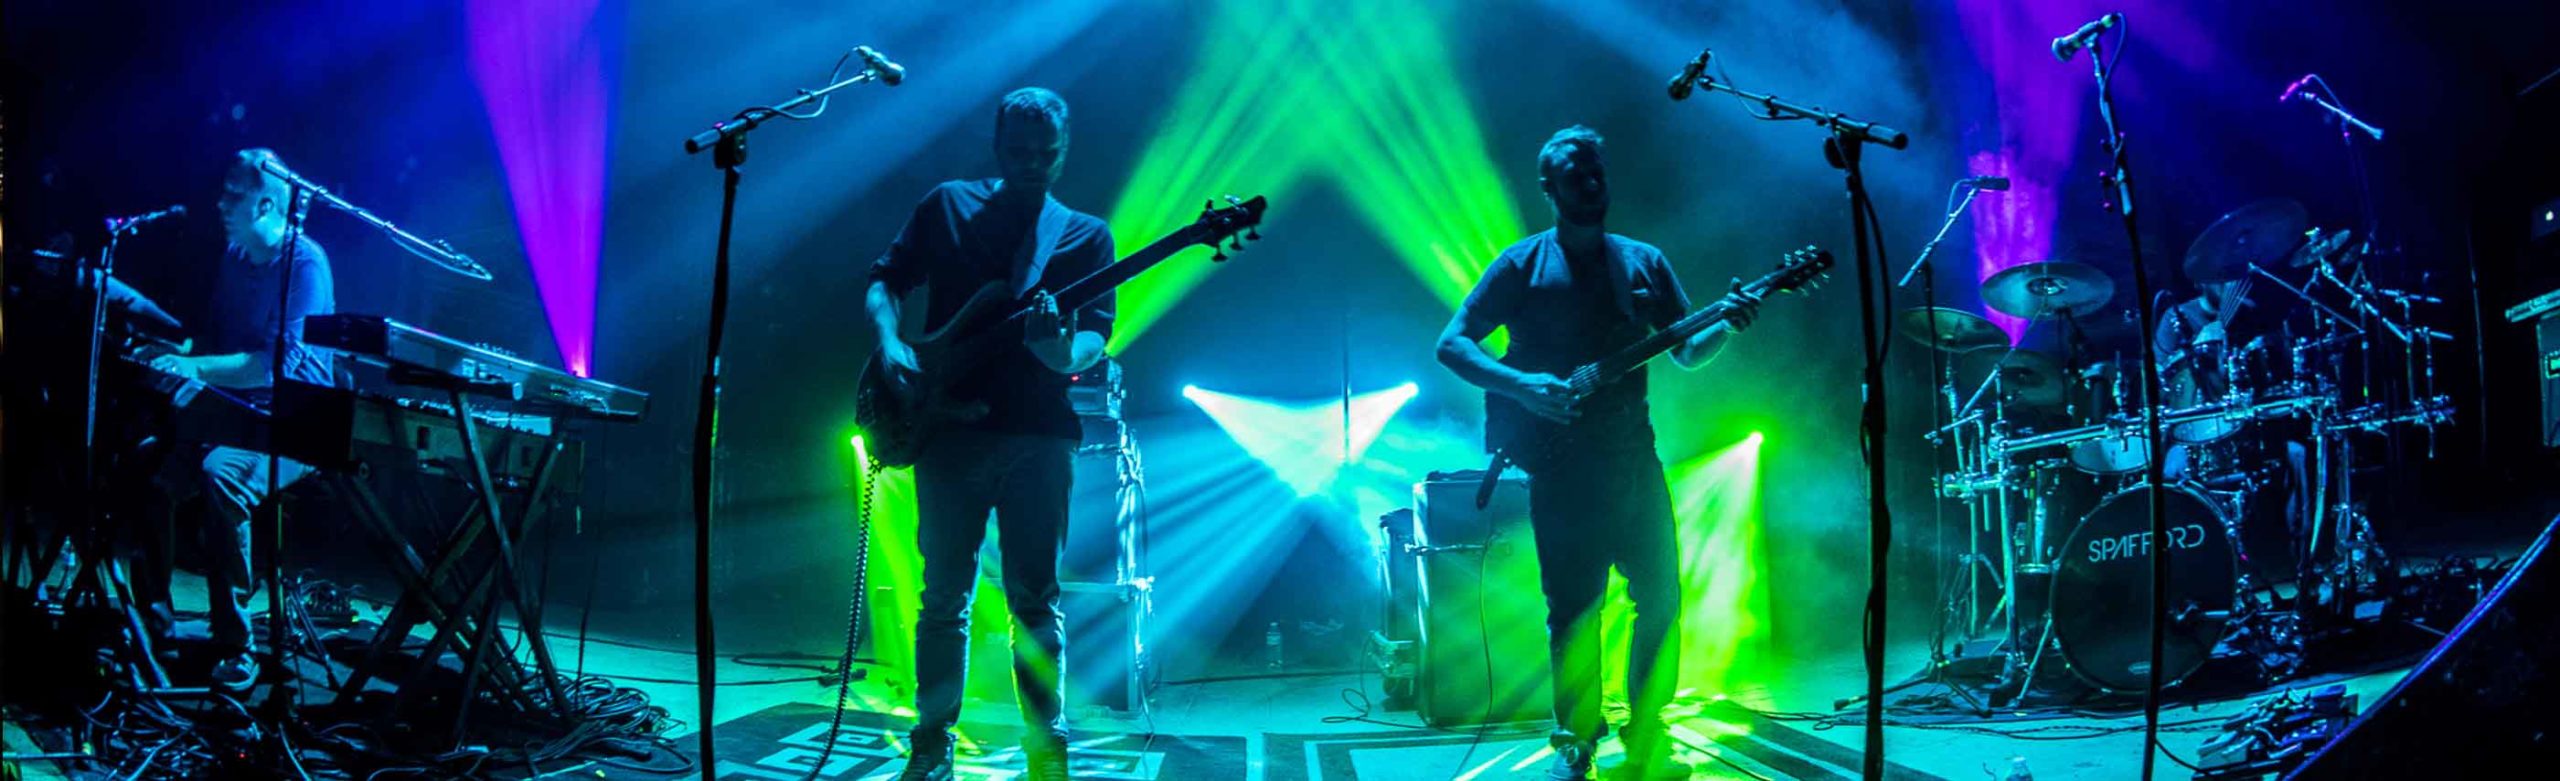 Event Info: Spafford at the Top Hat Image